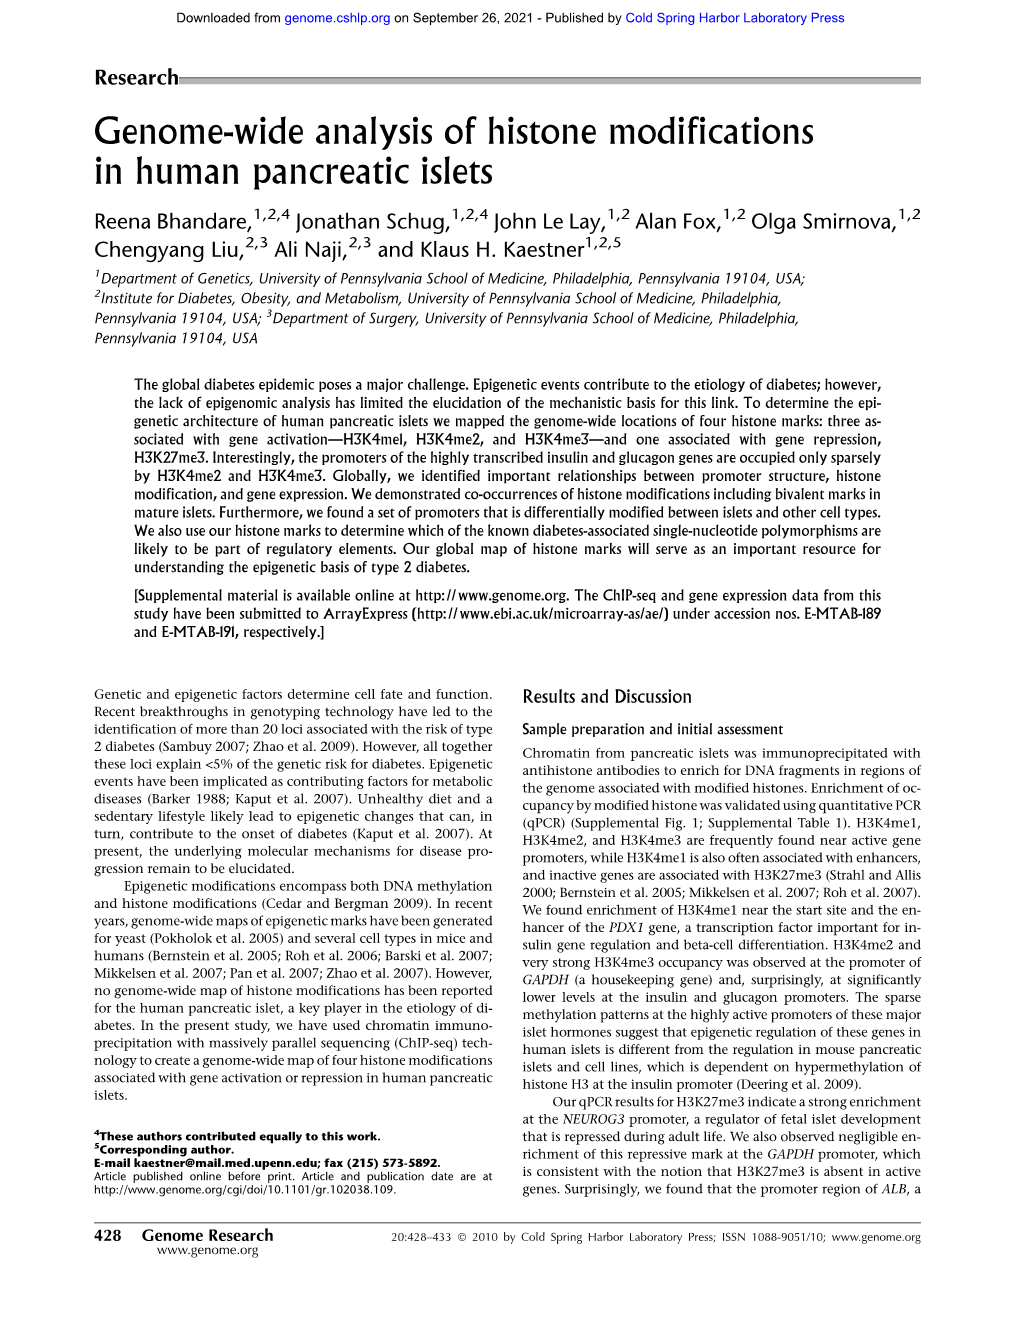 Genome-Wide Analysis of Histone Modifications in Human Pancreatic Islets